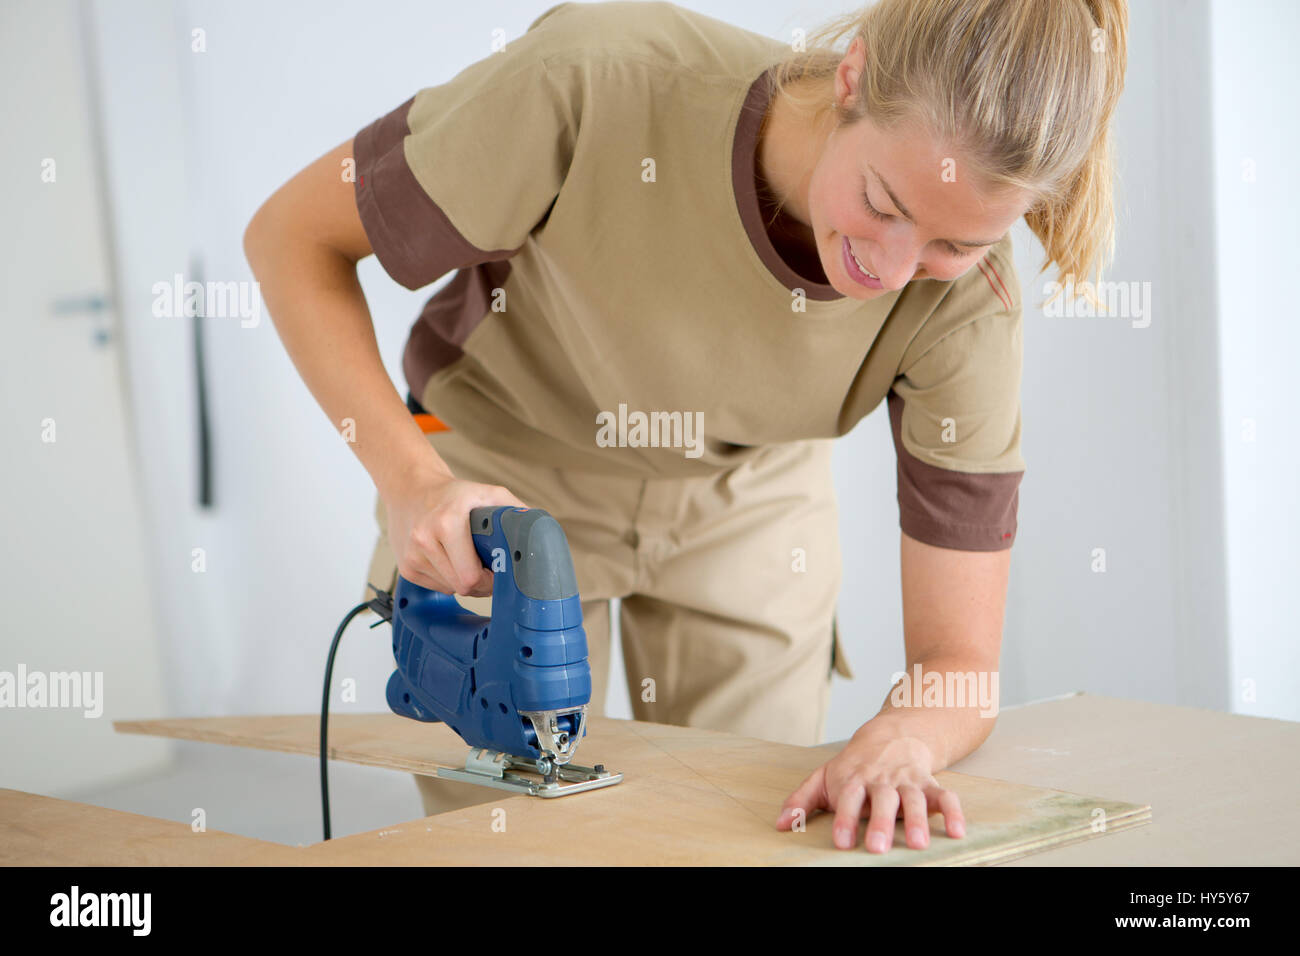 cutting a plywood Stock Photo